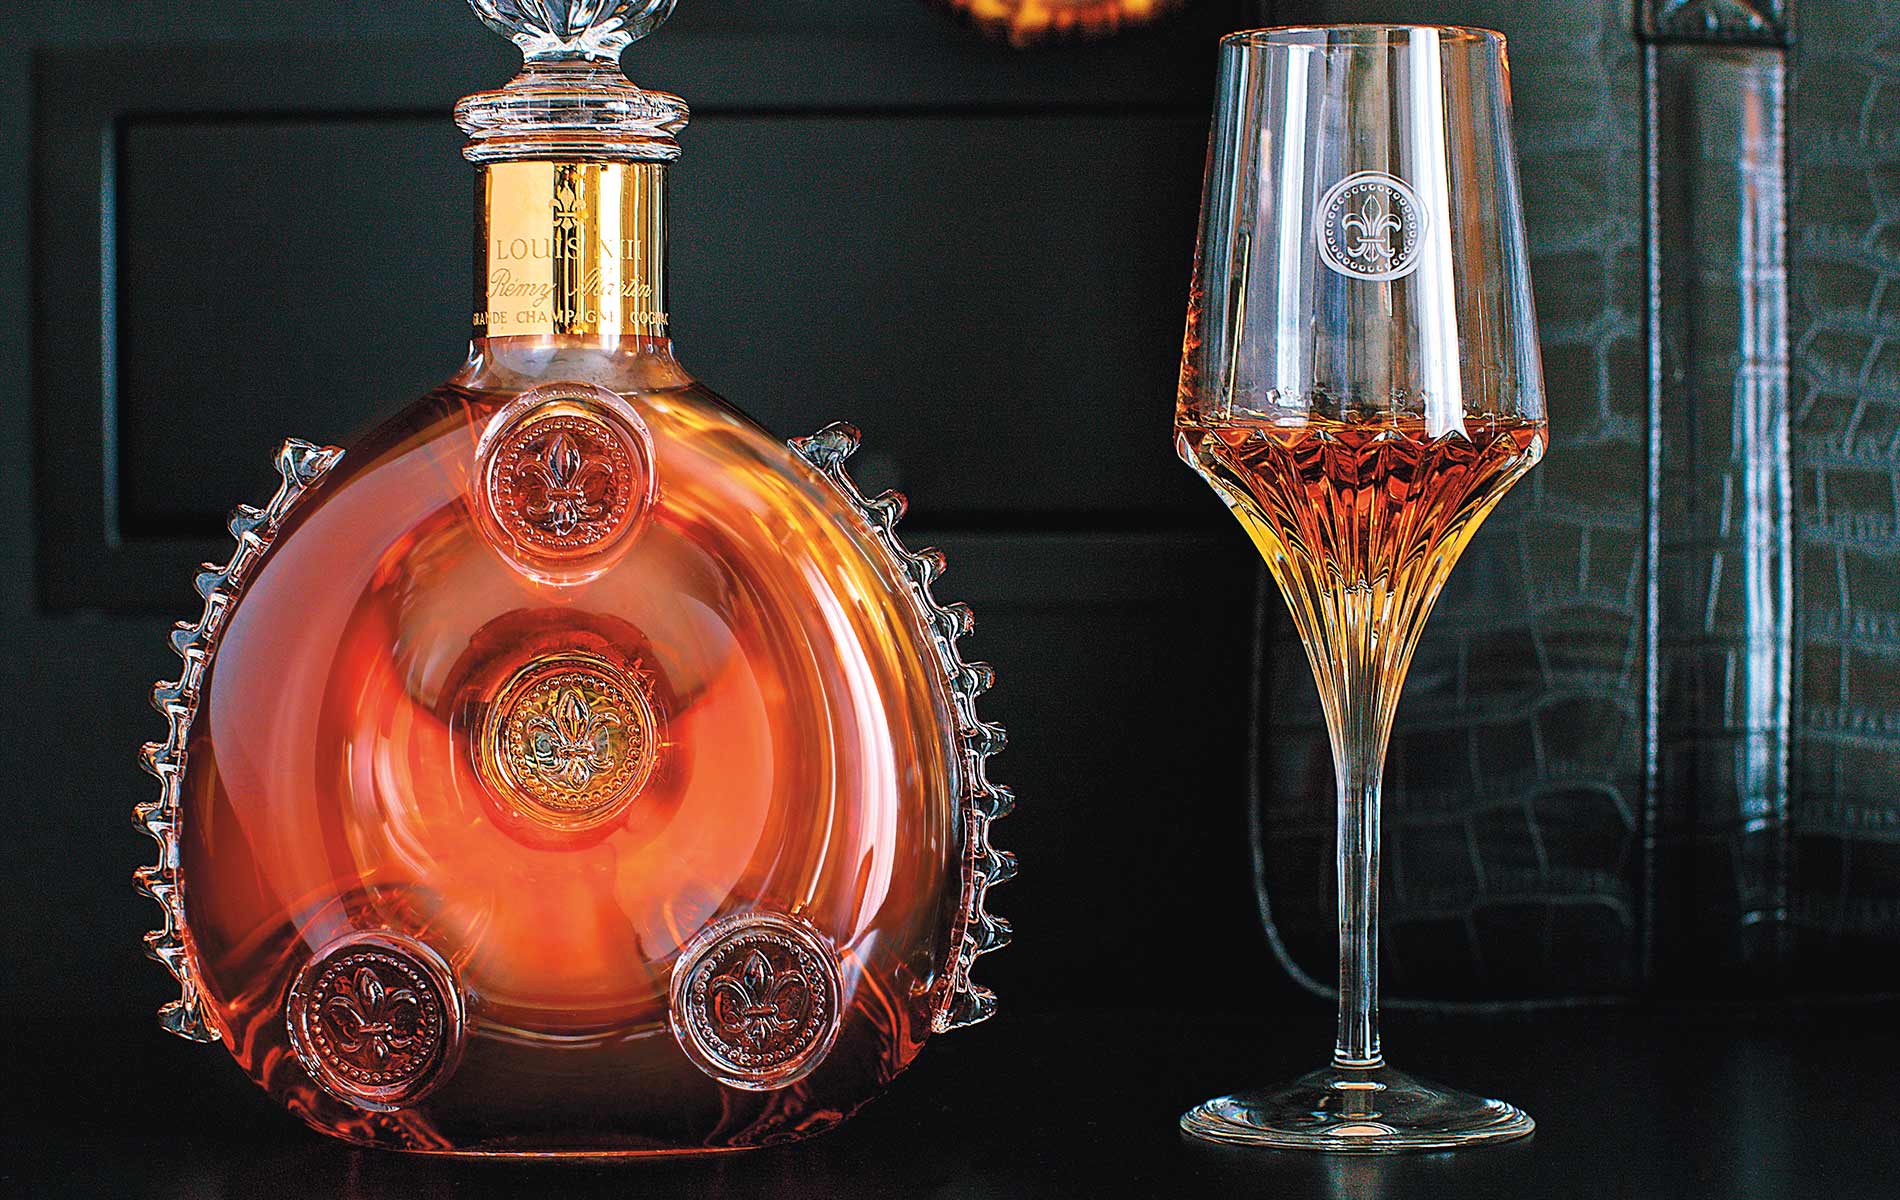 Beautiful Louis XIII decanter product shot Capt Andersons The Sophisticate Issue